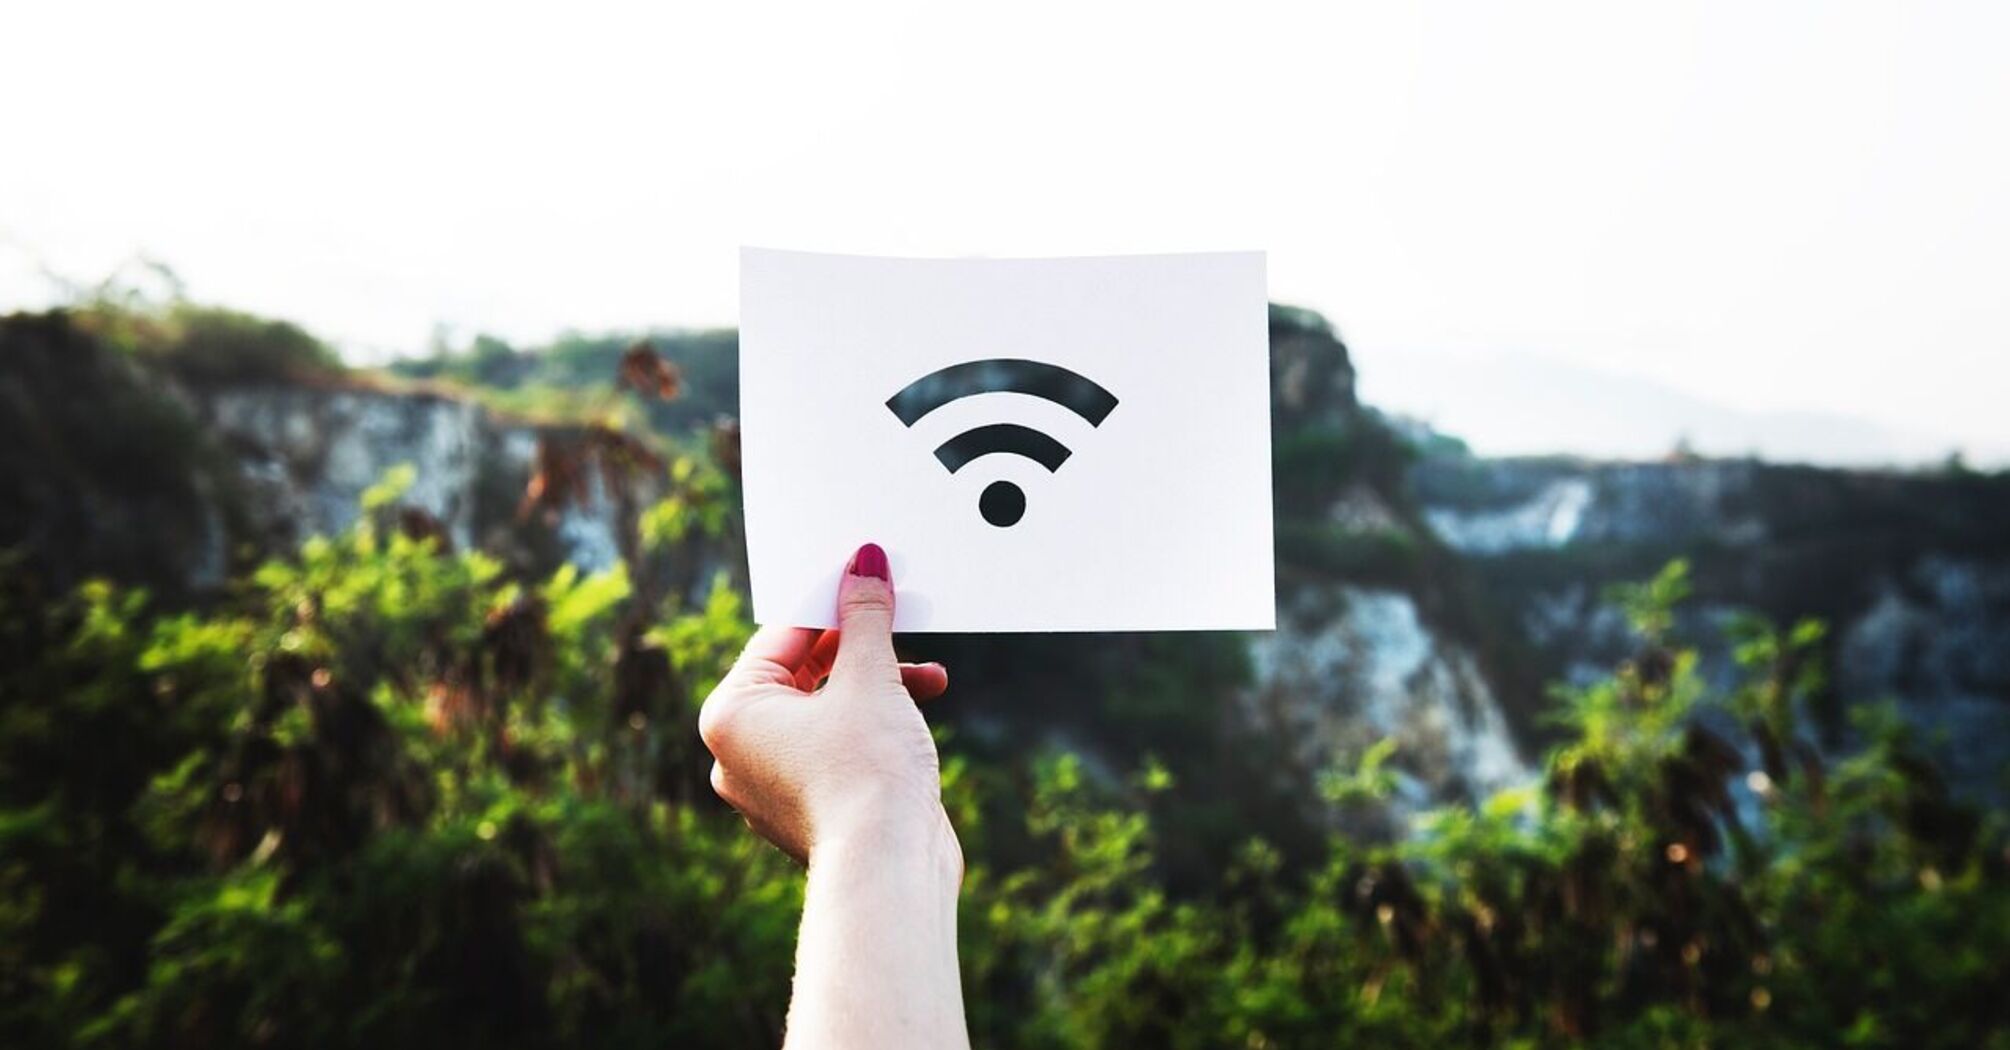 Vacationers in the United Kingdom are warned to beware of "evil twins" Wi-Fi